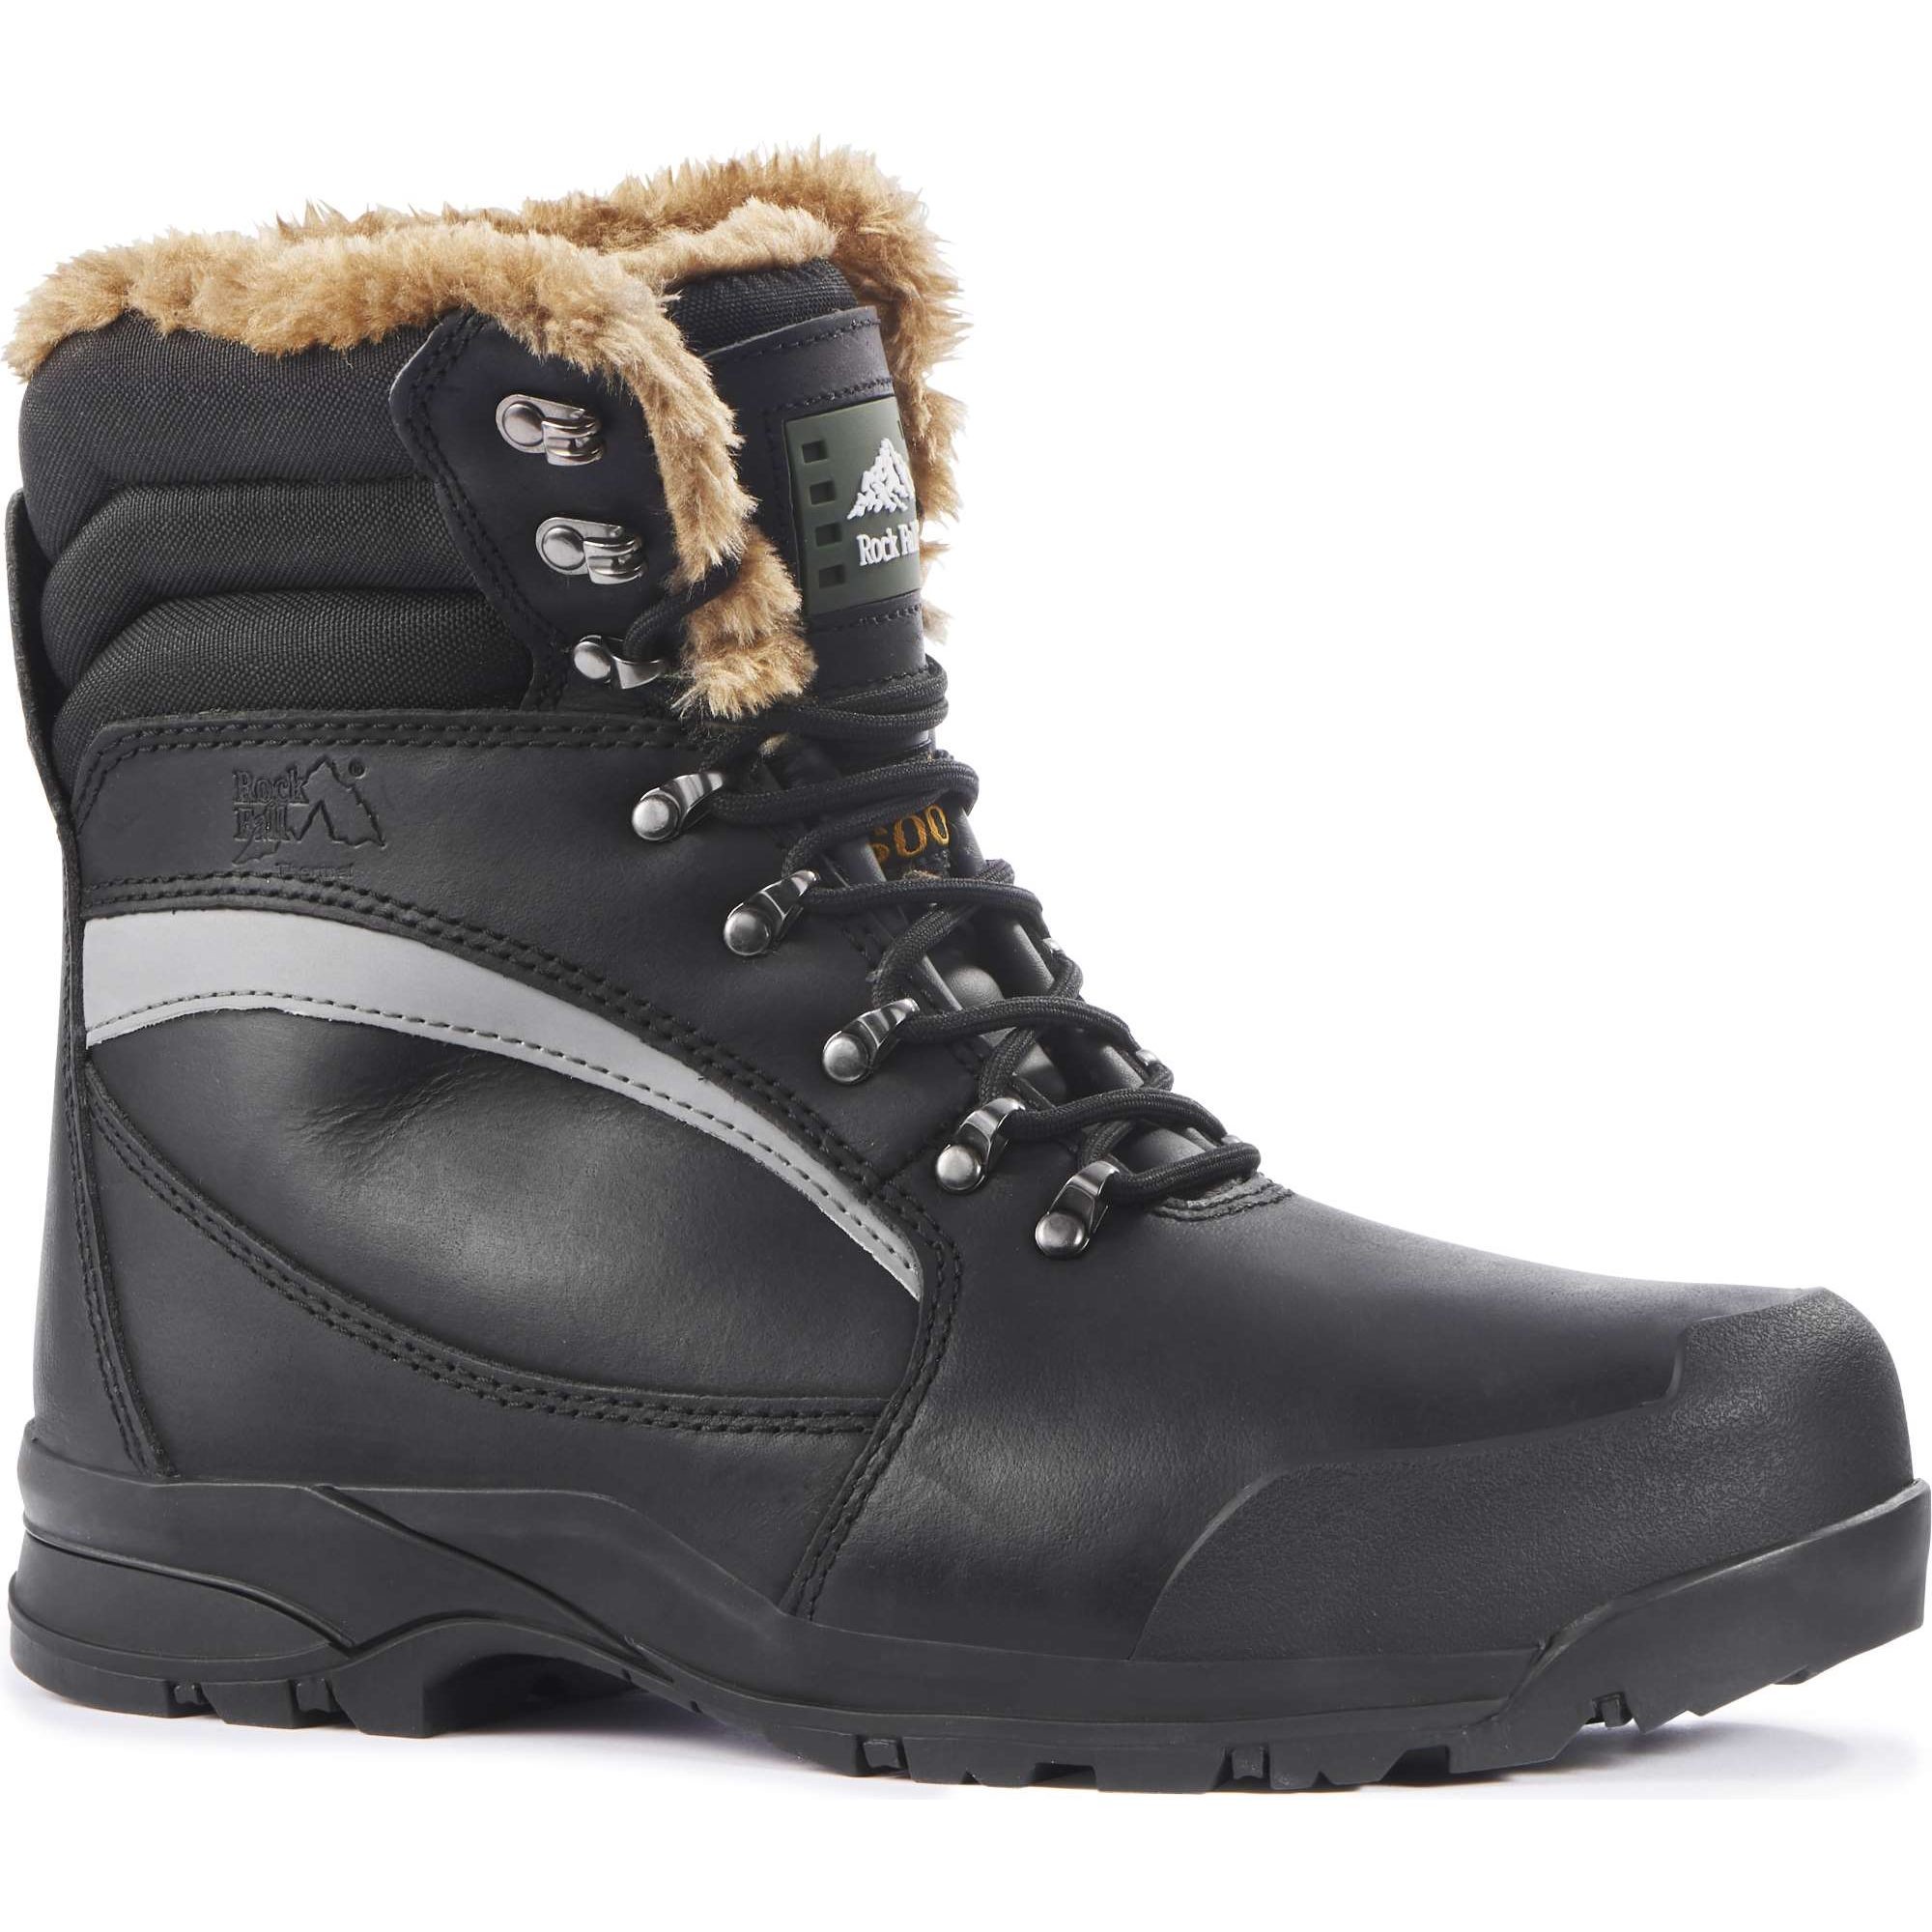 Rock Fall RF001 Alaska S3 black fur lined cold winter composite toe safety boot 